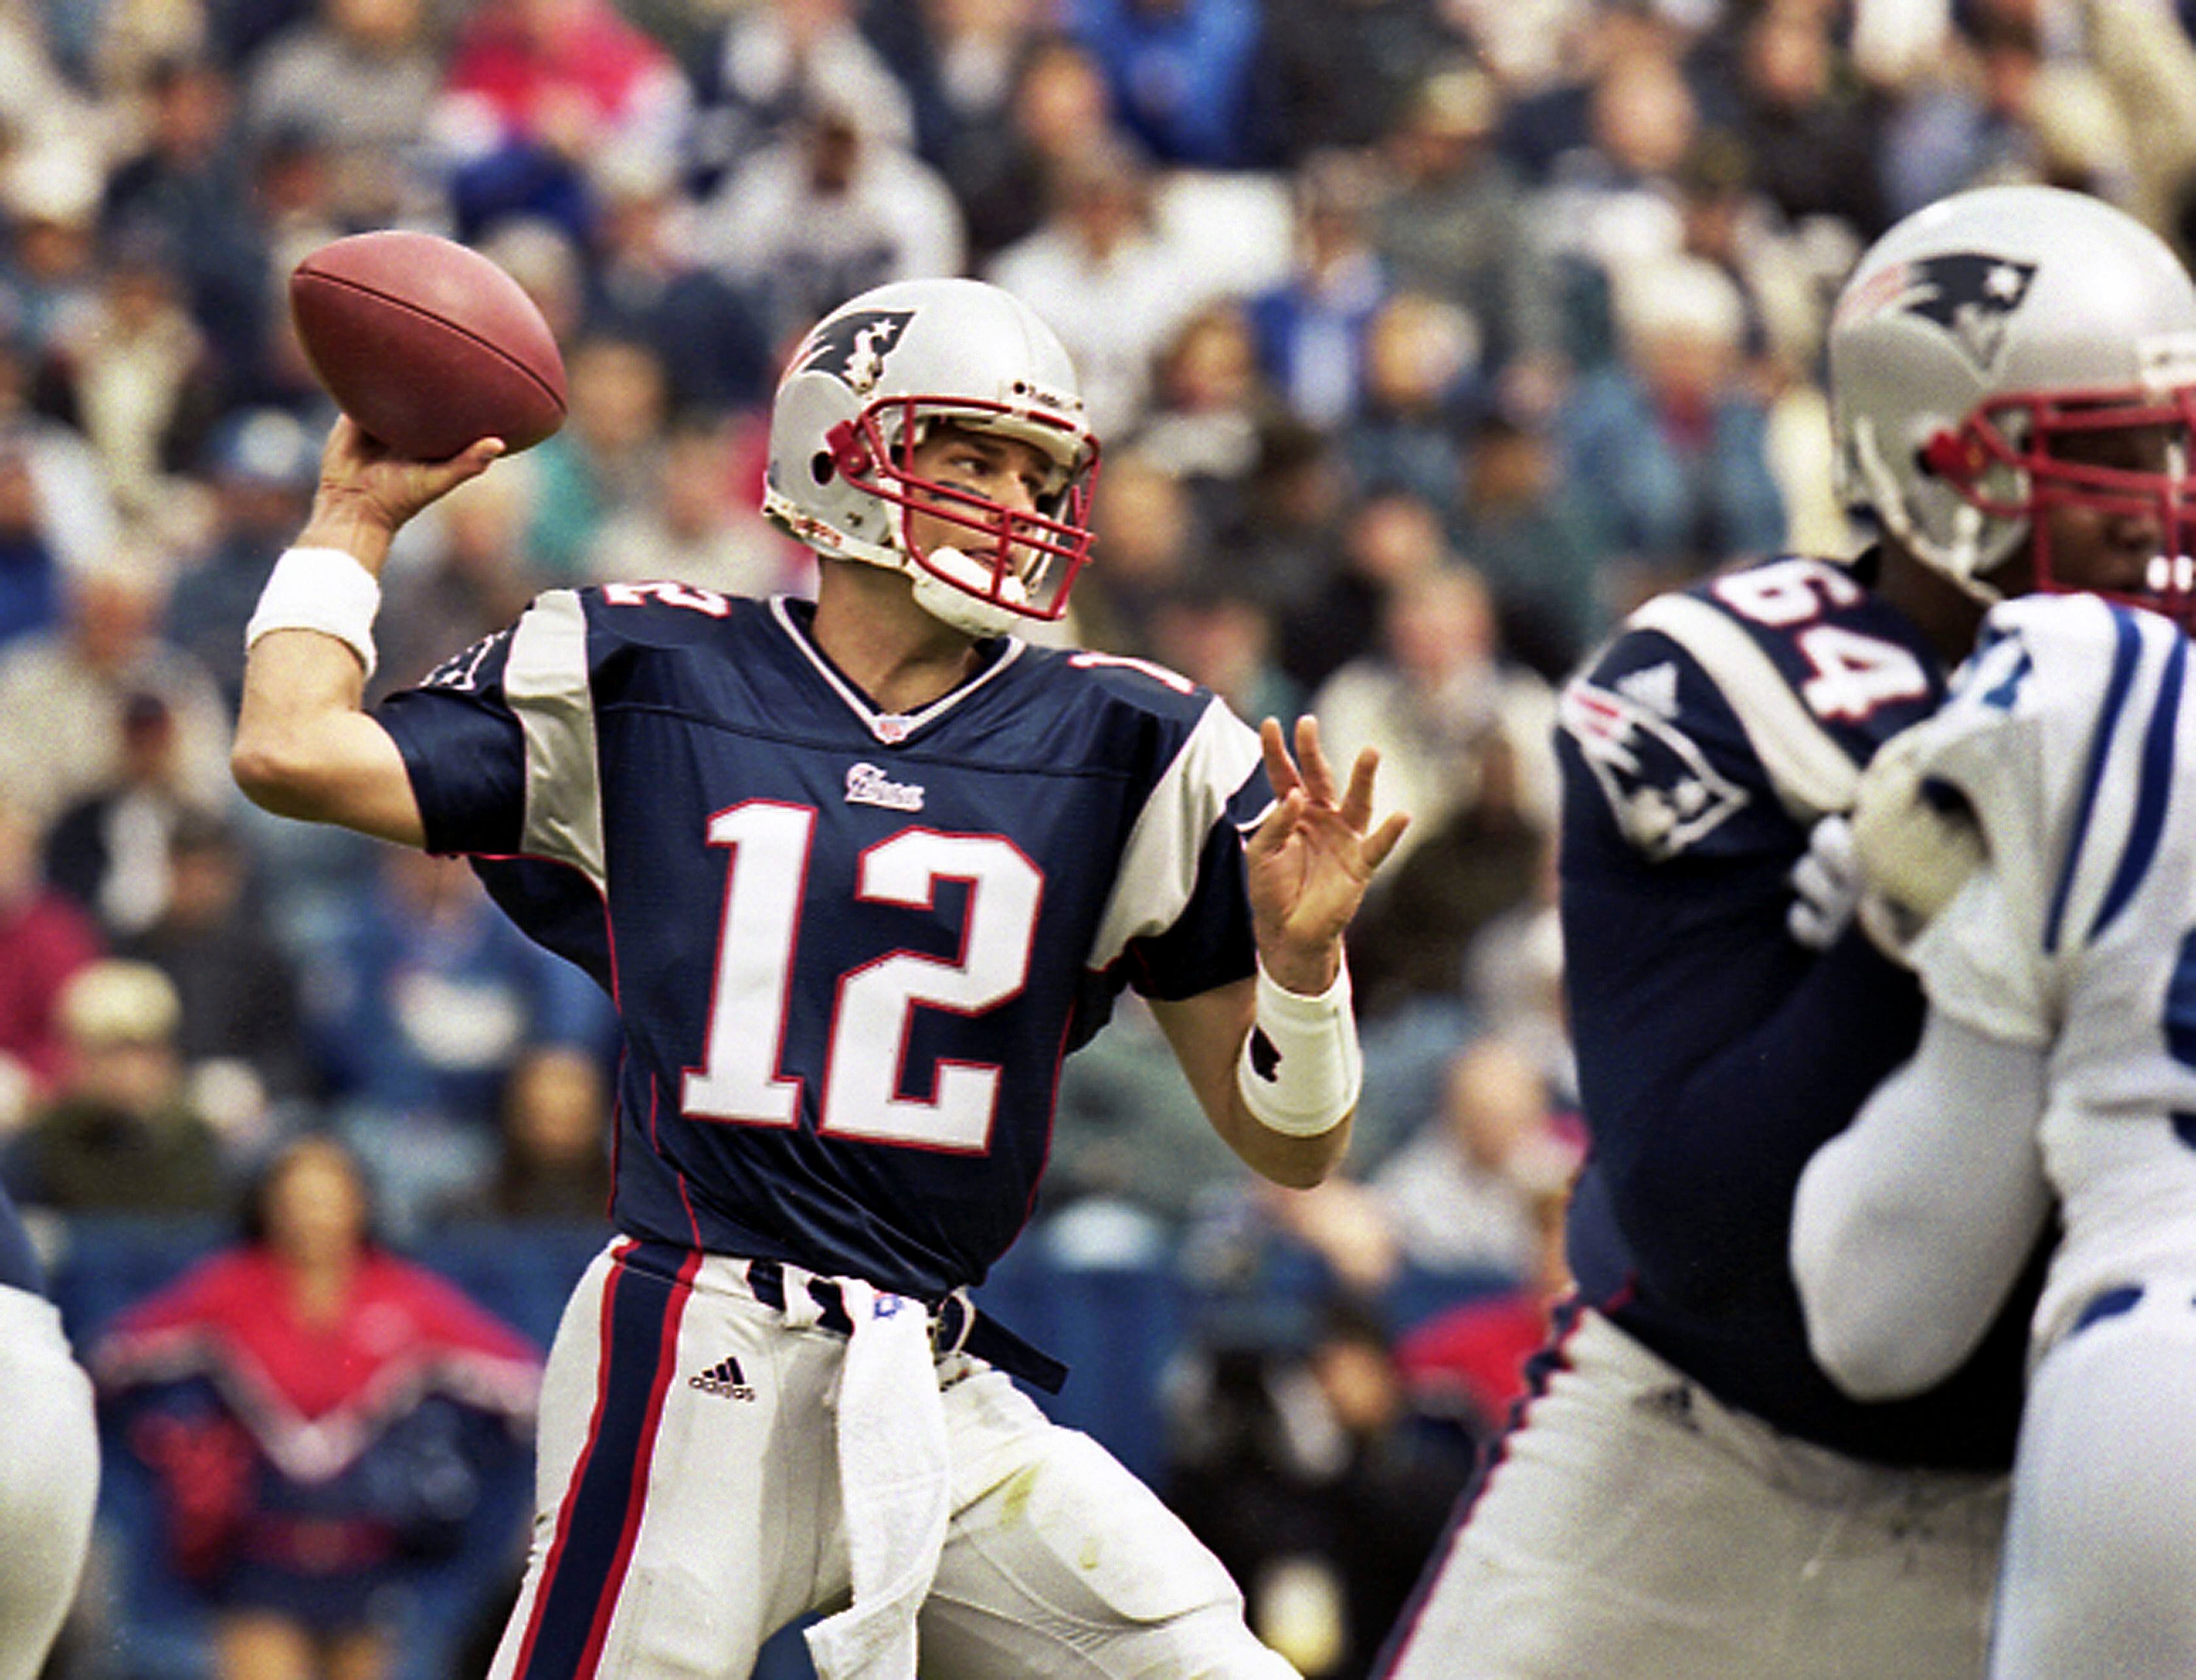 Tom Brady's unprecedented career is filled with highlight moments